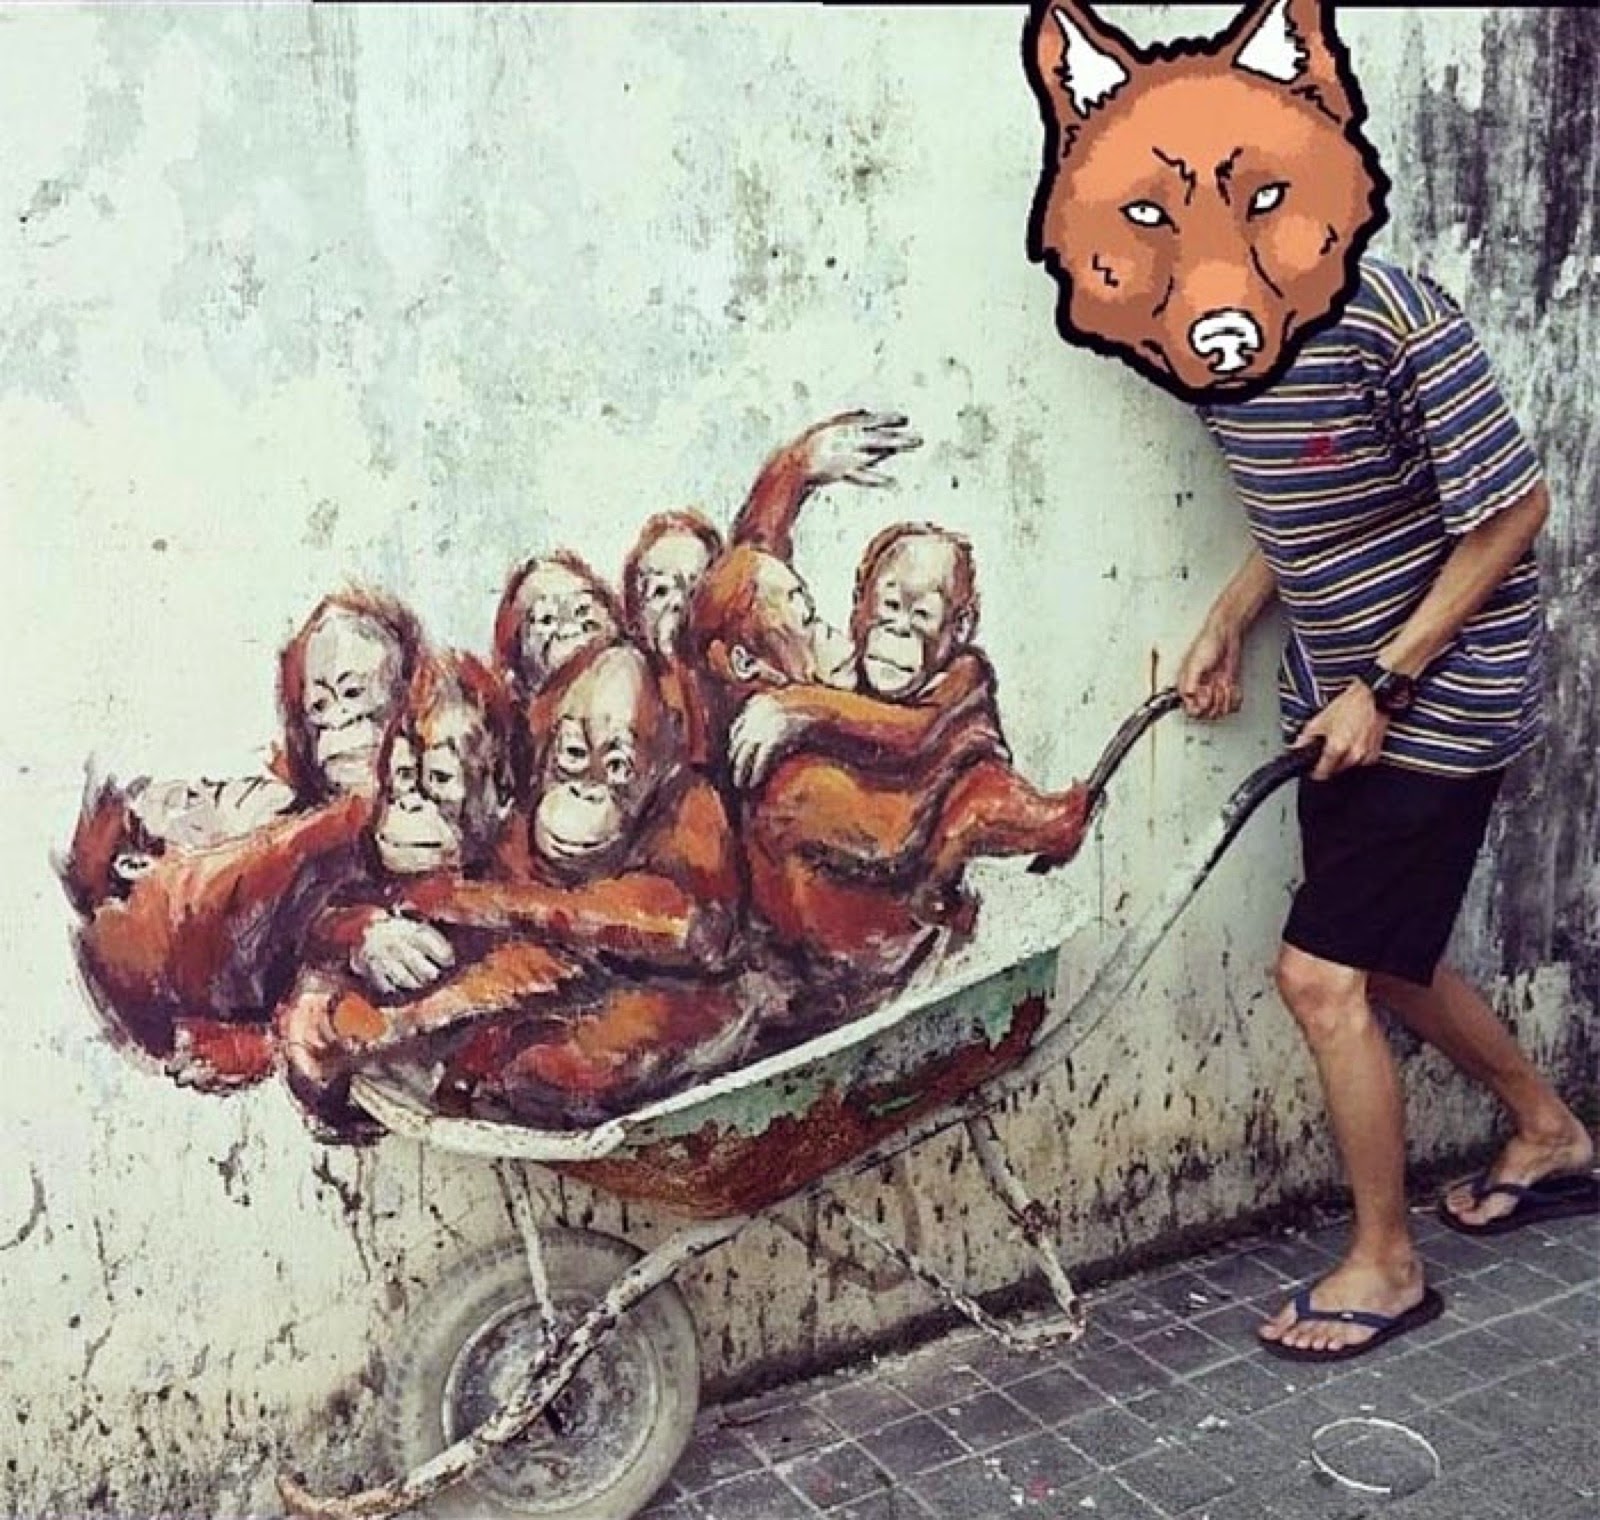 While we last heard from him last week in Italy (covered), Ernest Zacharevic is now back in Malaysia where he spent his Sunday afternoon working on a new series of pieces around Kuching.